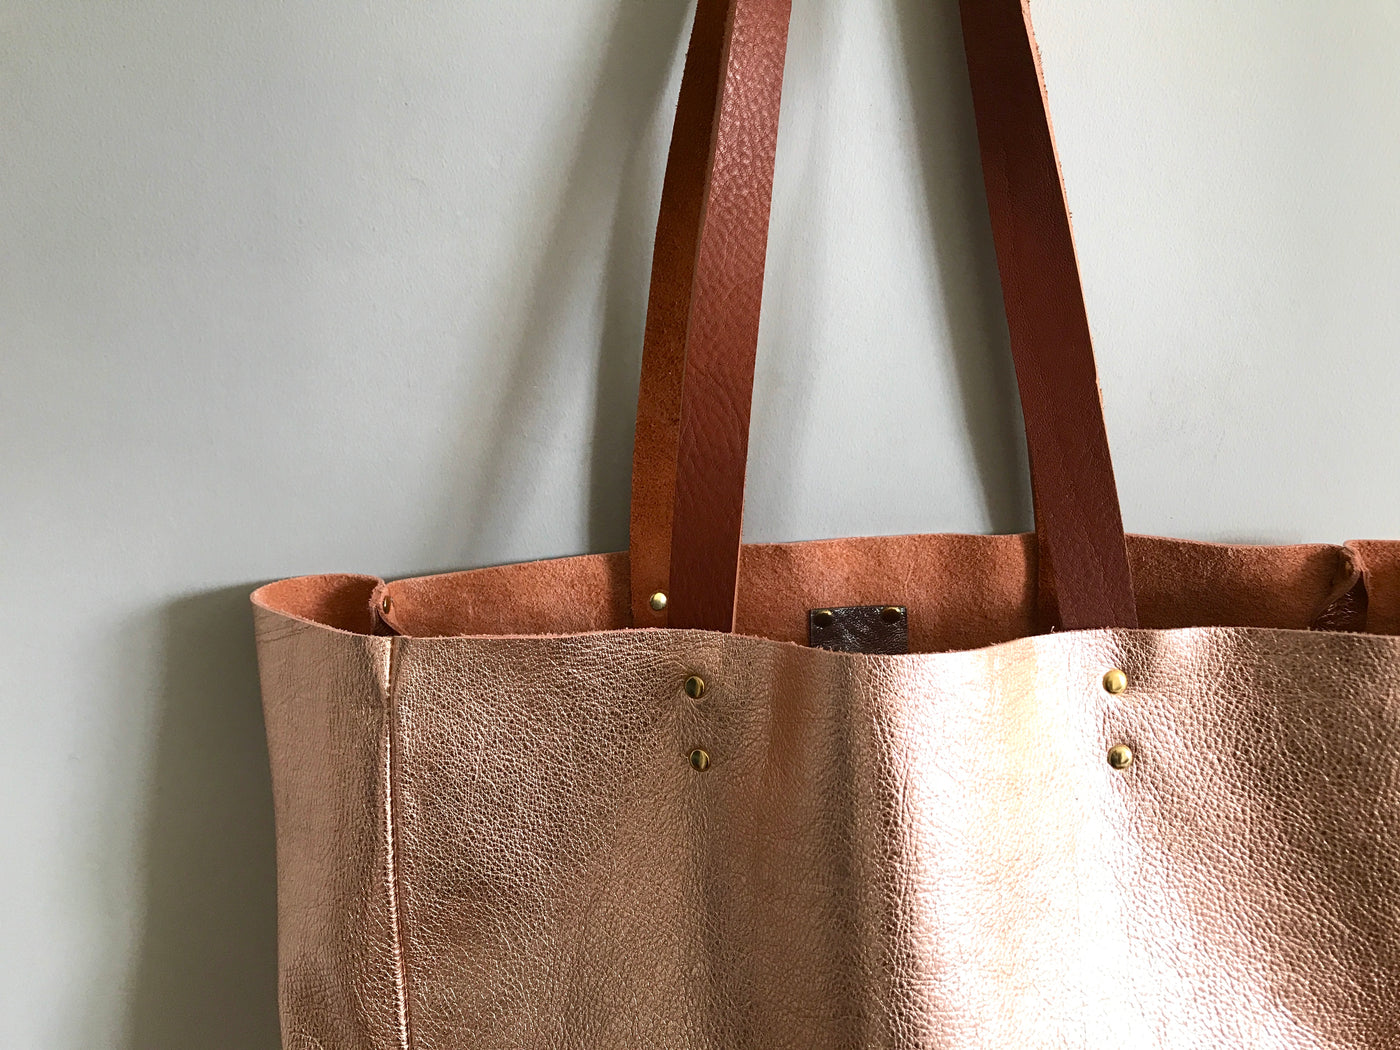 Large rose gold leather Hercules tote bag – Ginger and Brown